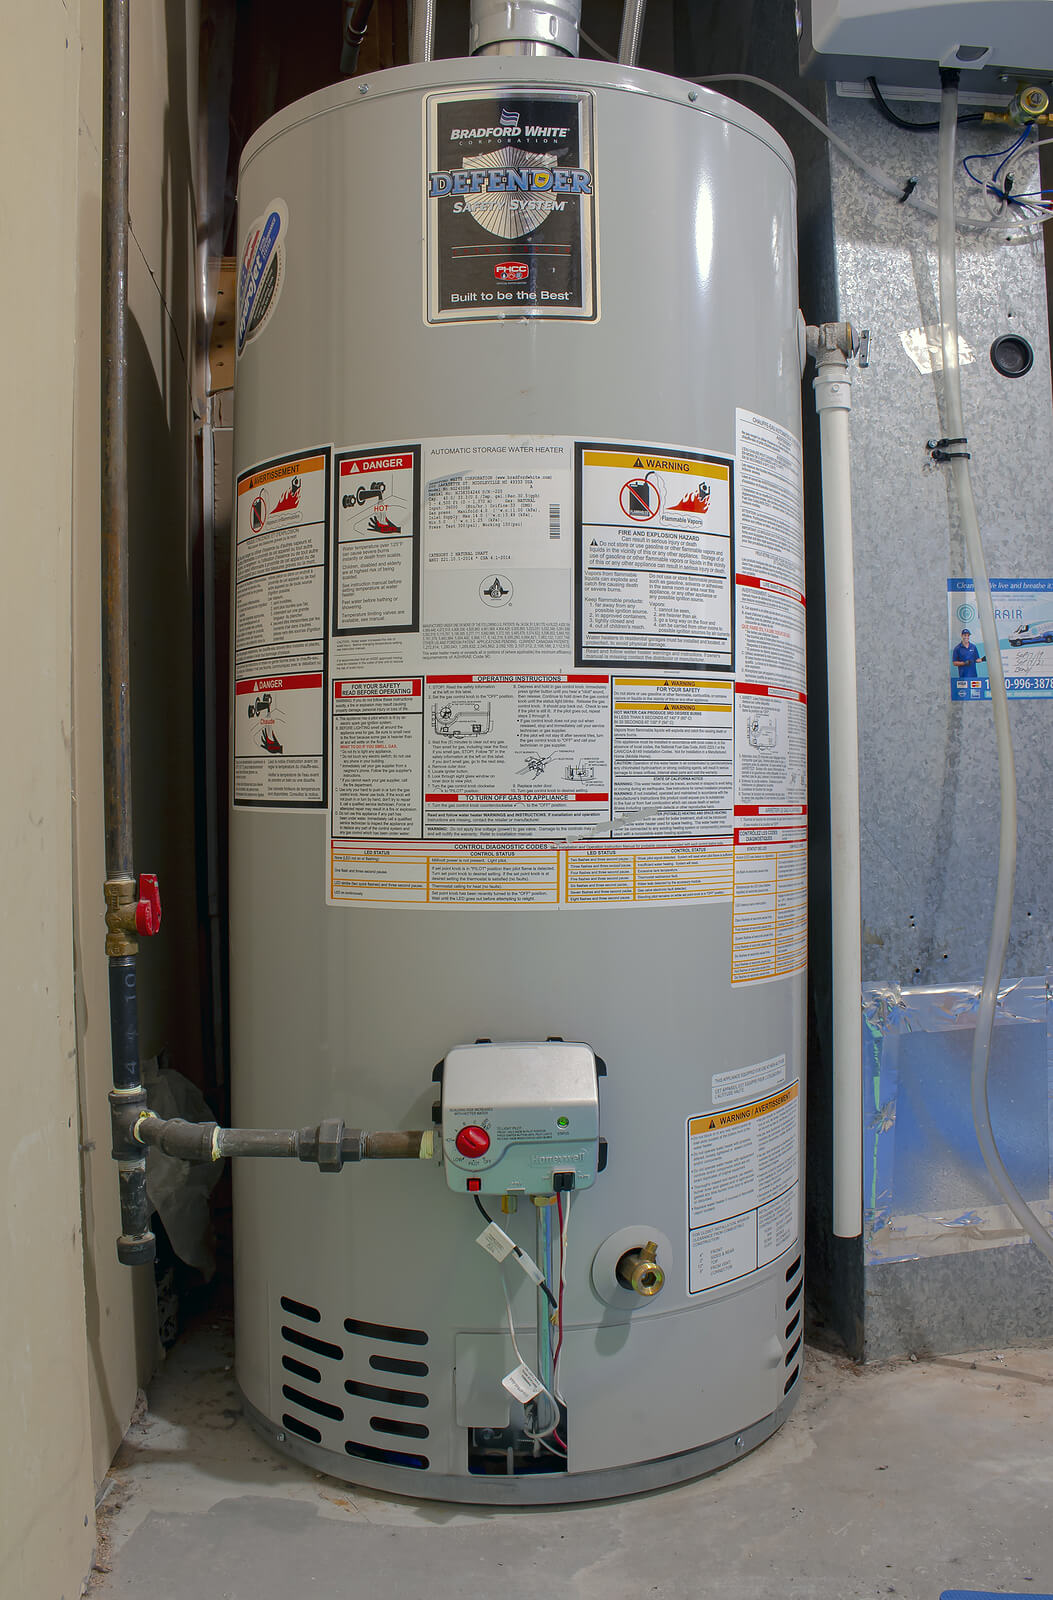 How to Winterize Your Hot Water Heater: Simple 5-Step Guide